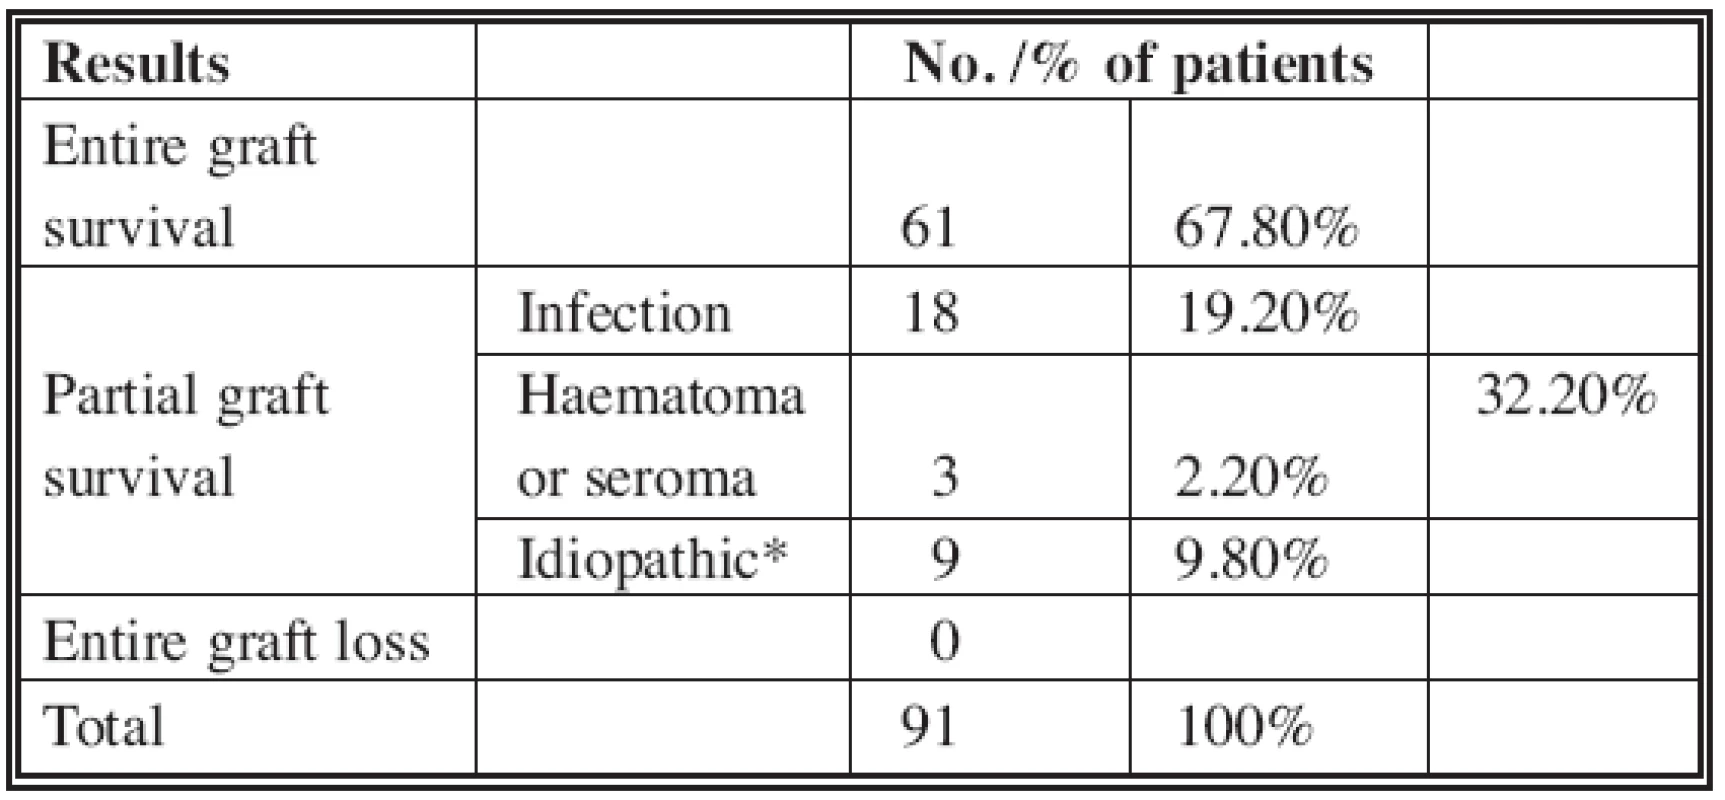 Comparation of entire/partial skin graft survival in our selected group of patients